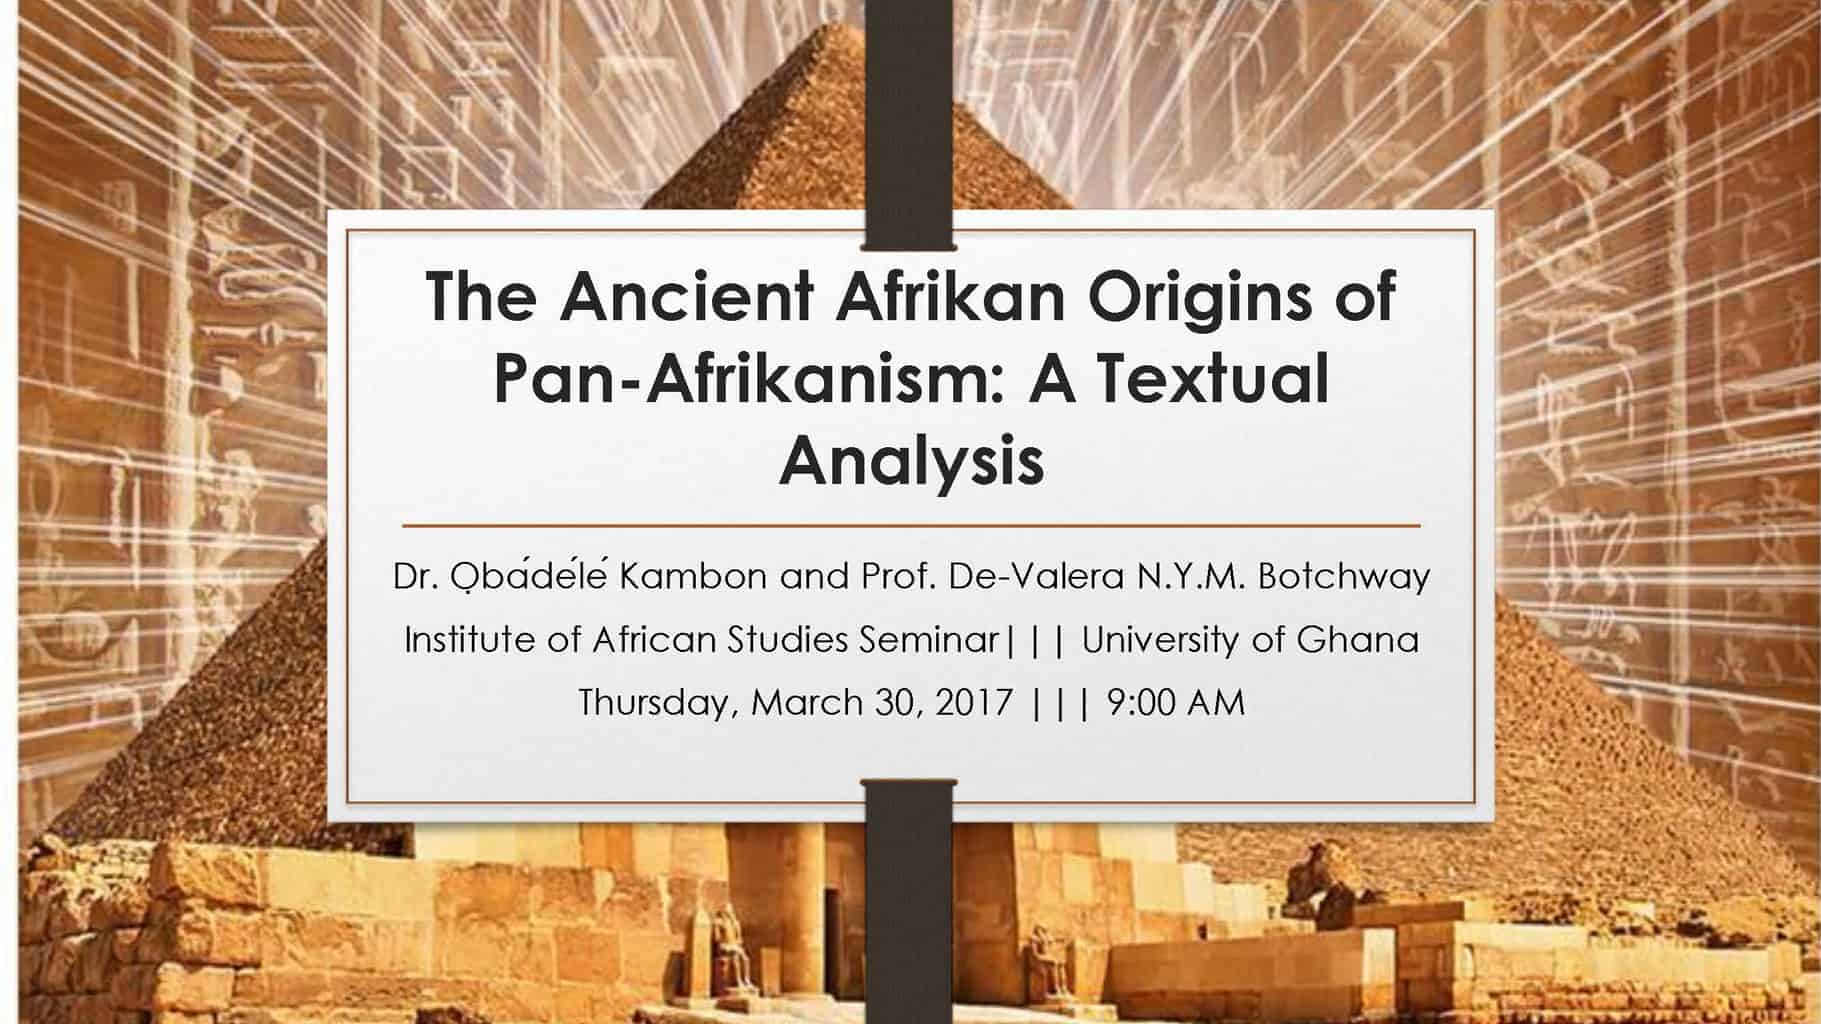 The Ancient Afrikan Origins of Pan-Afrikanism: A Textual Analysis Dr. ỌbádéléKambon and Prof. De-Valera N.Y.M. Botchway Institute of African Studies Seminar||| University of Ghana Thursday, March 30, 2017 ||| 9:00 AM